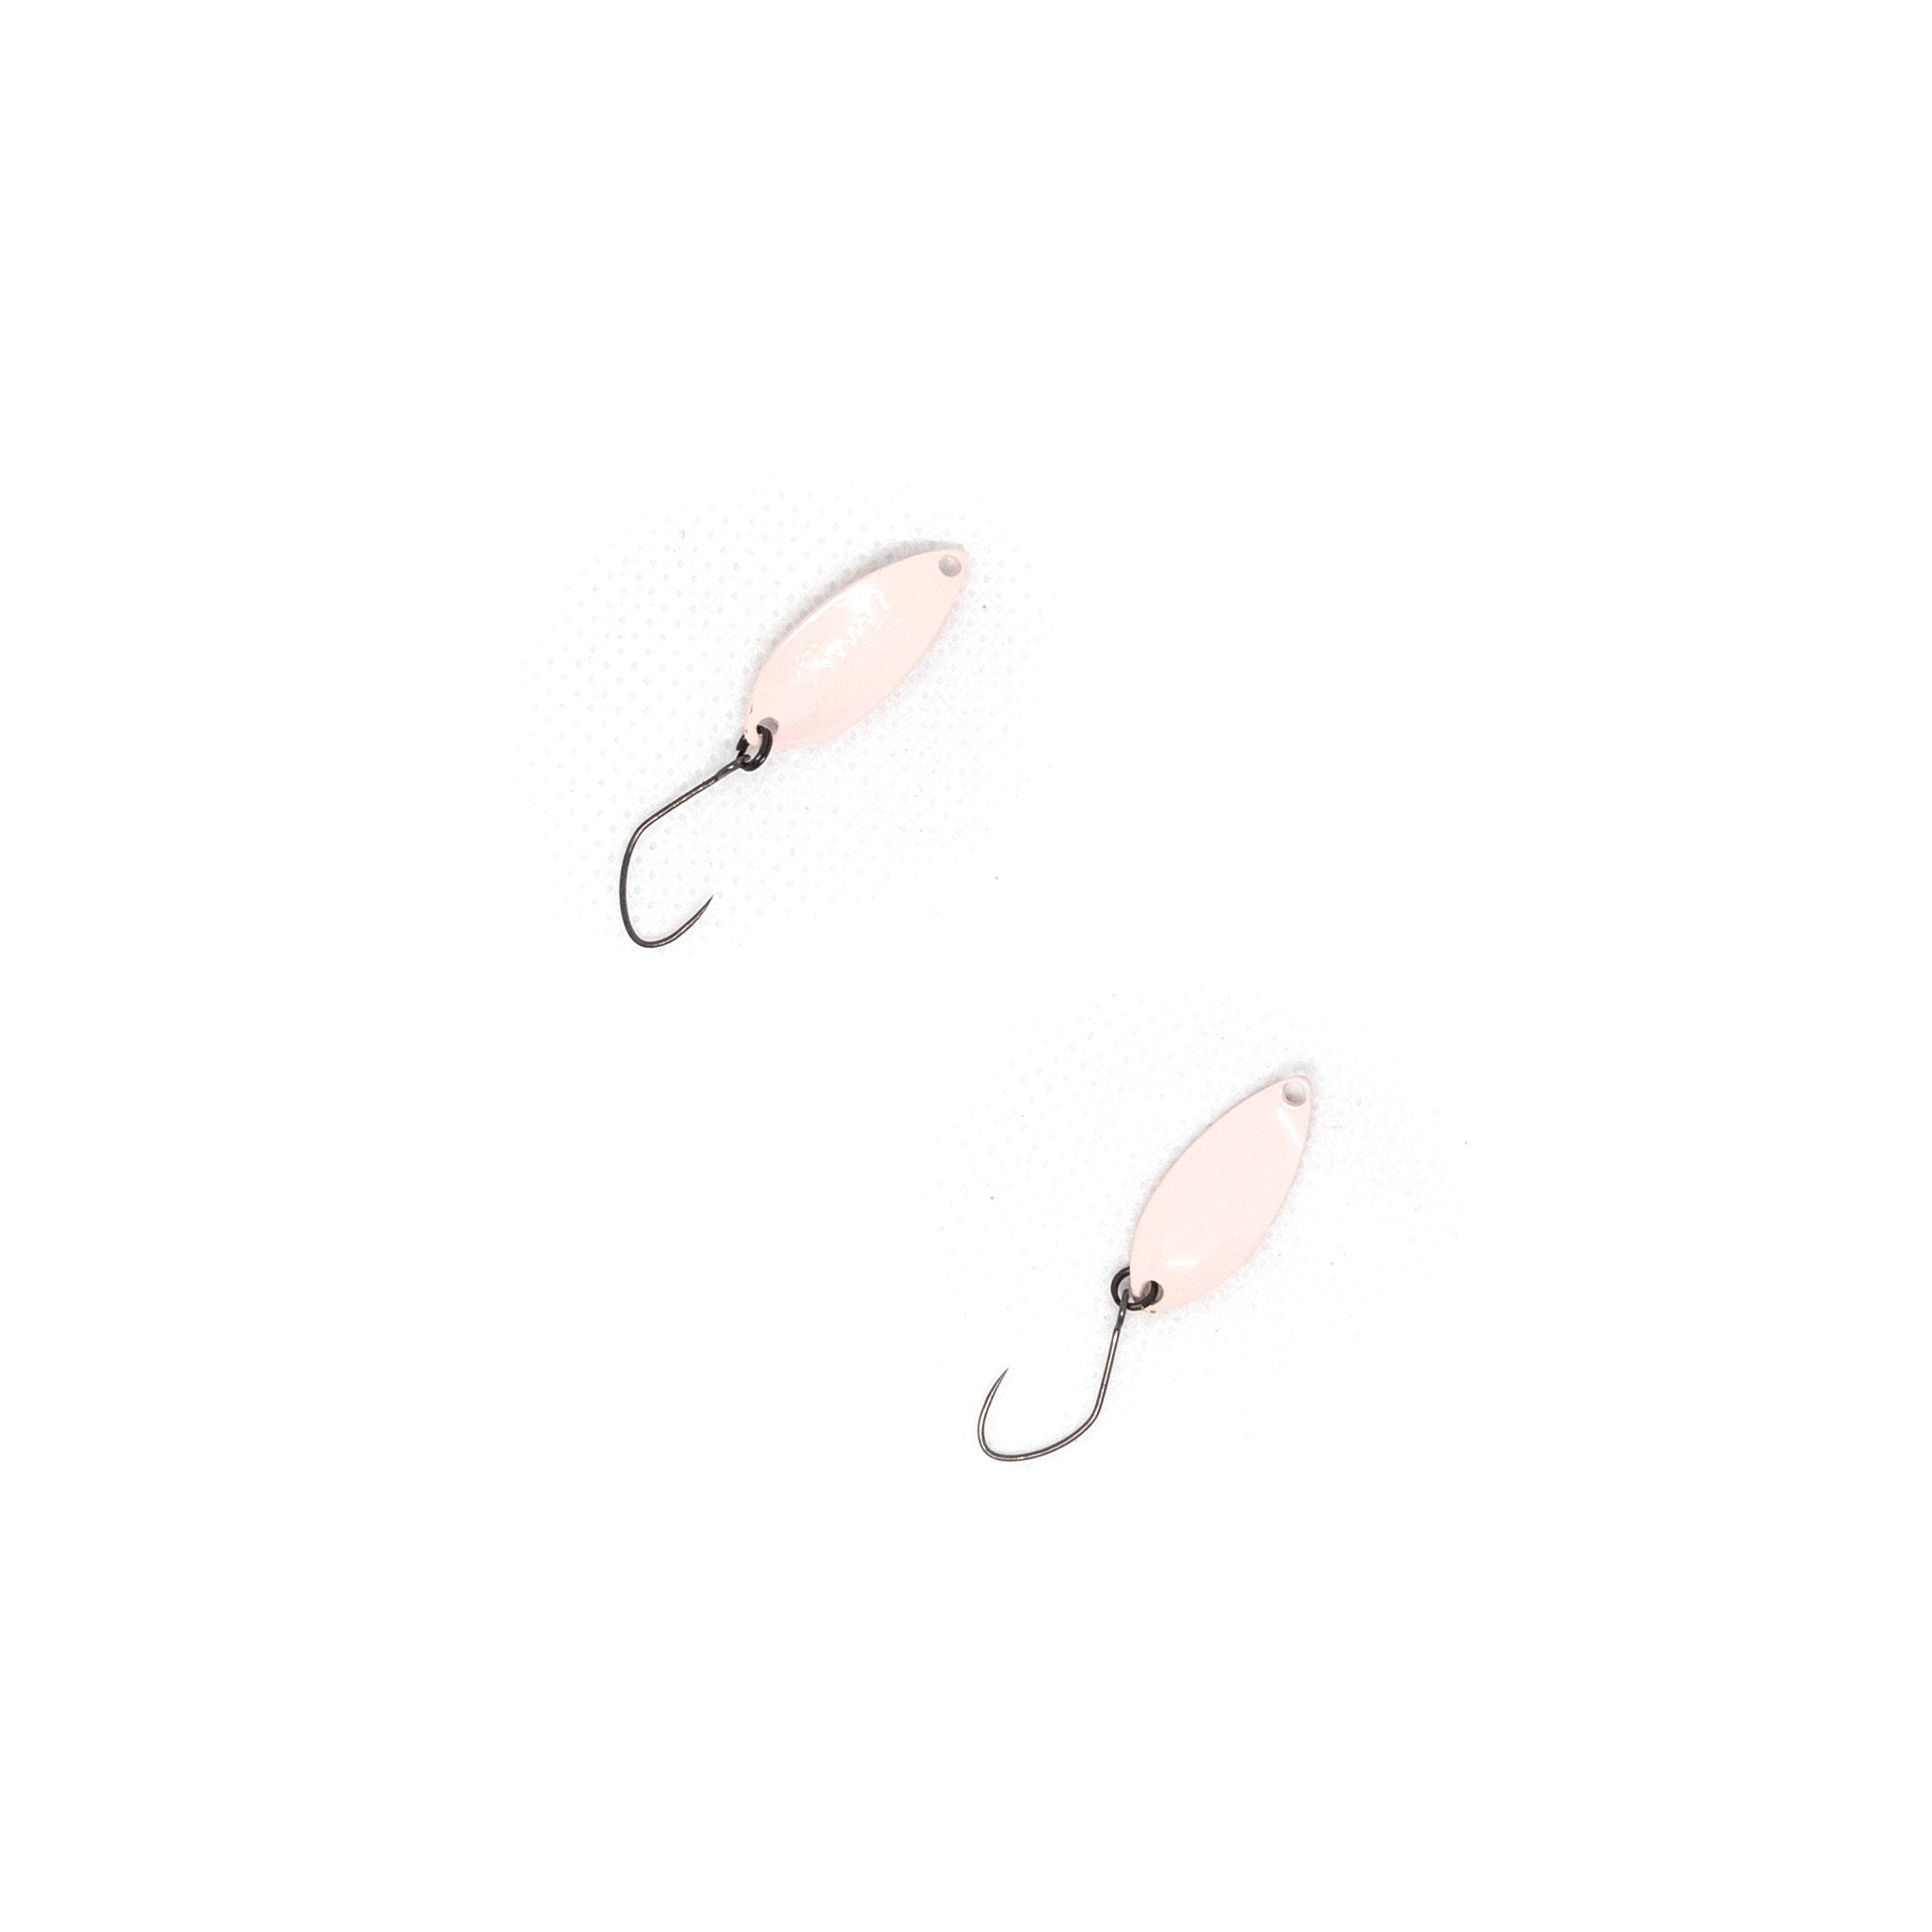 Forest Factor 0.9g Trout Spoon Color #09 "Light Pink" - The Borrowed Lure